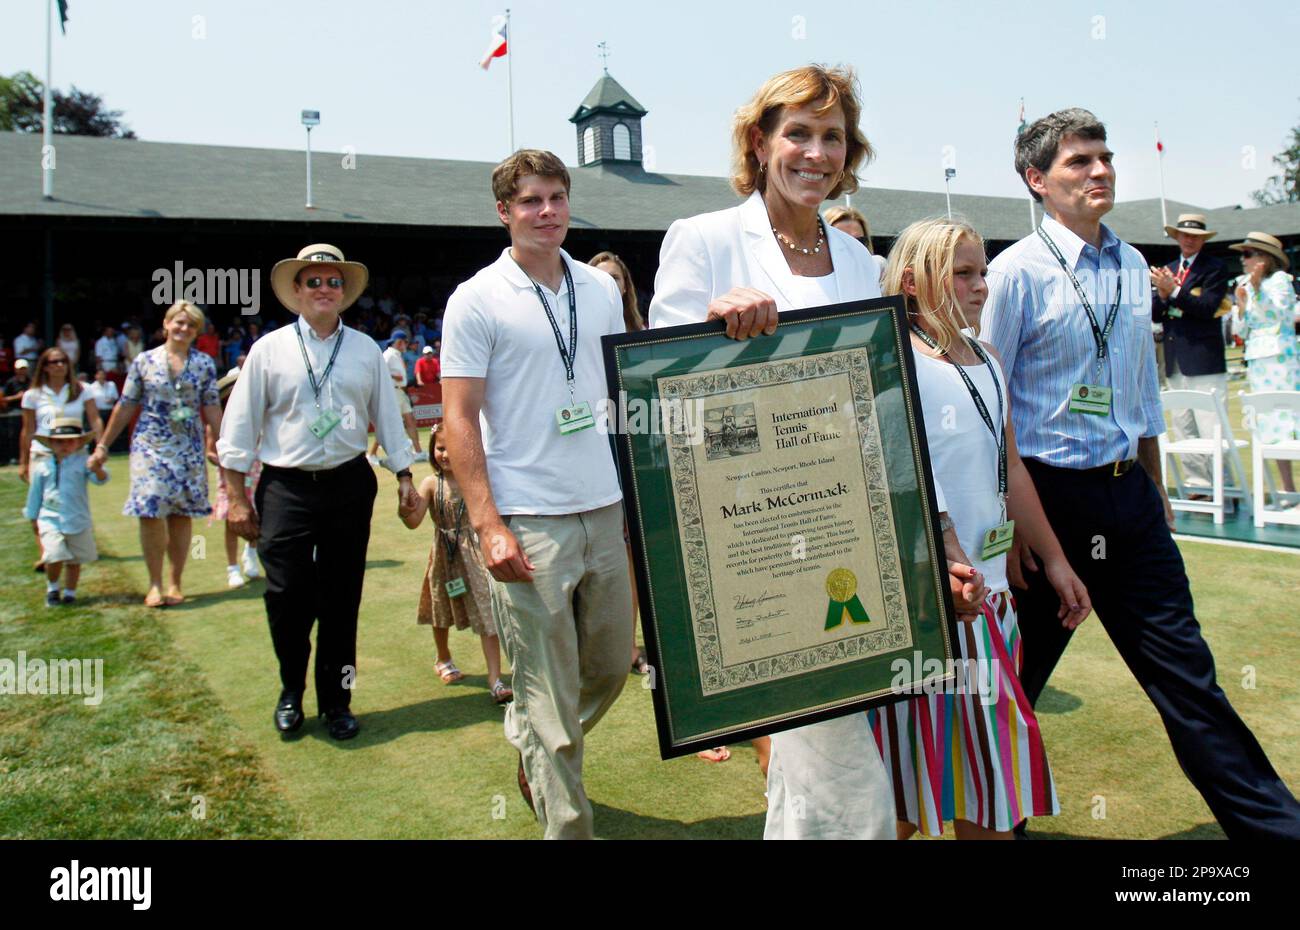 Betsy McCormack, widow of inductee Mark McCormack, the founder and CEO of  International Management Group, holds his plaque as she leads the McCormack  family around center court during his induction posthumously into